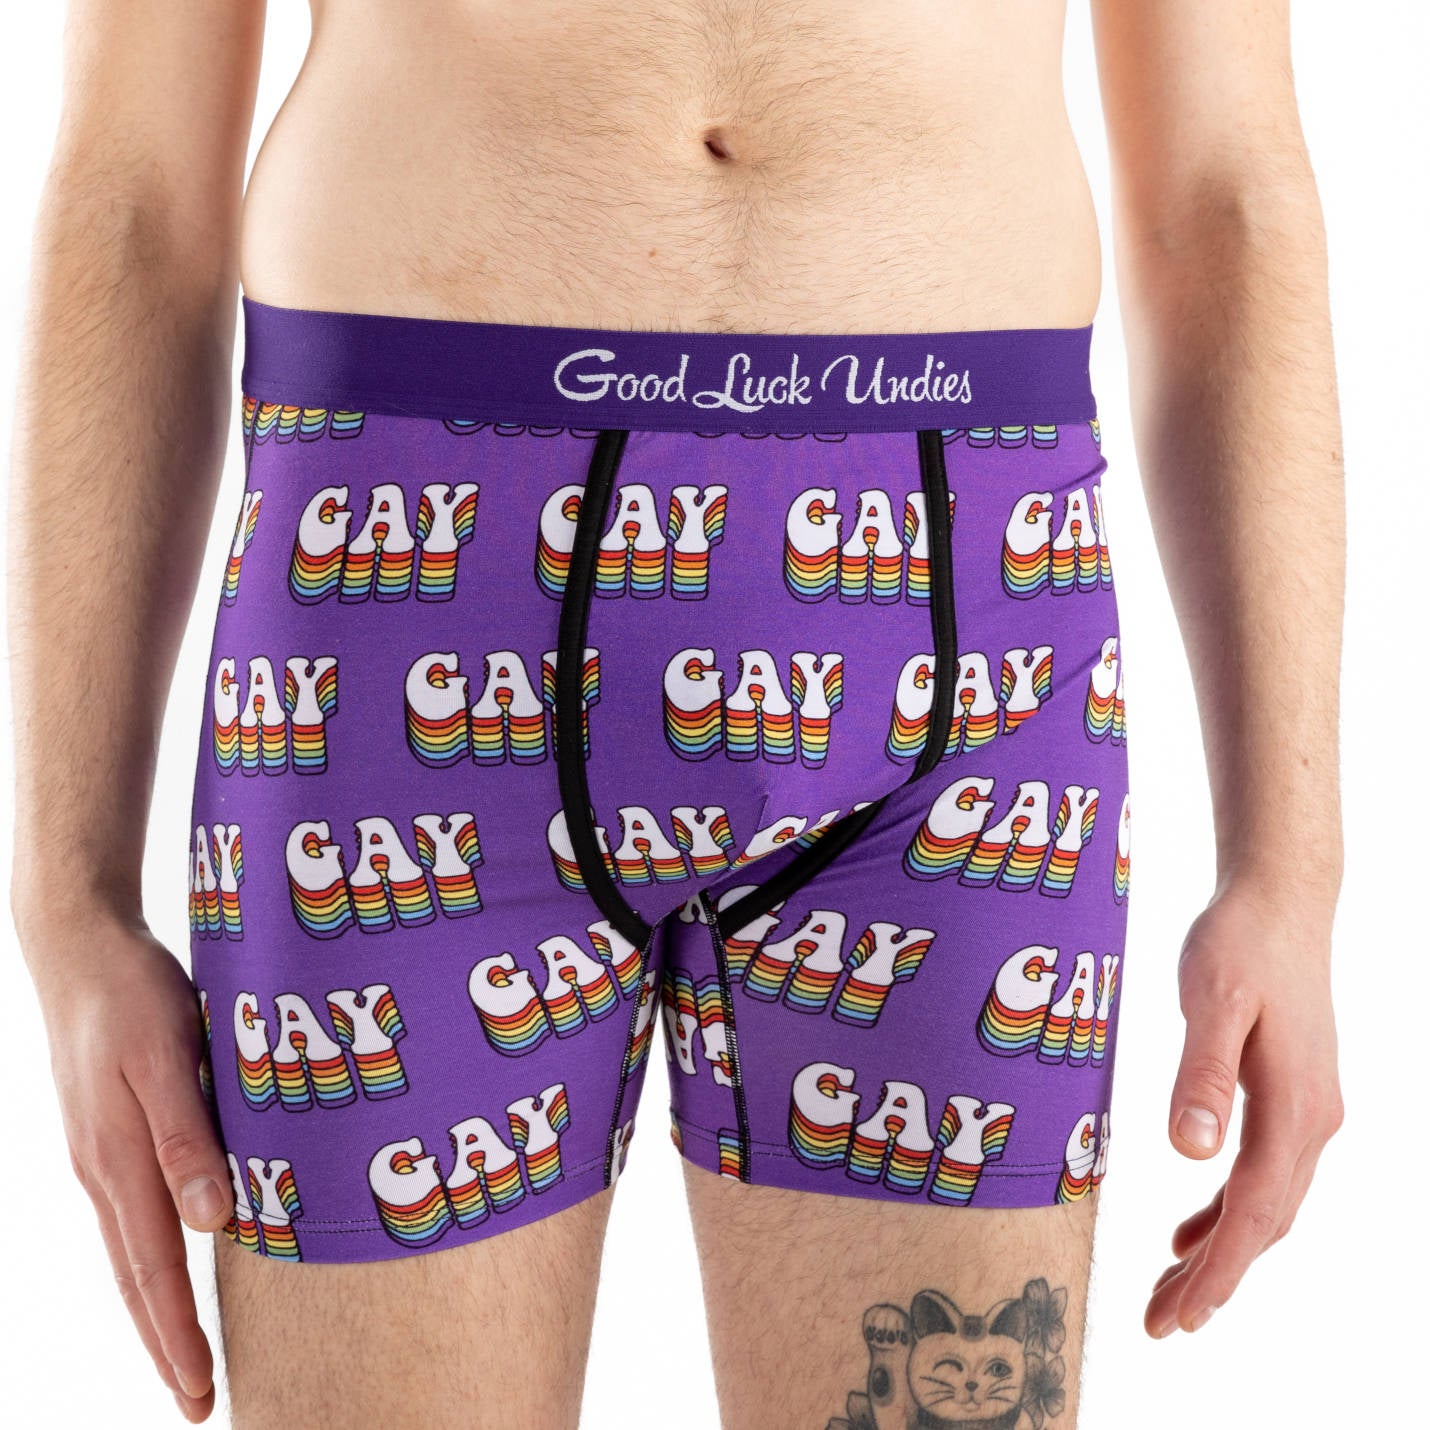 How Many Pairs Of Underwear Should A Gay Man Own? – Next Gay Thing